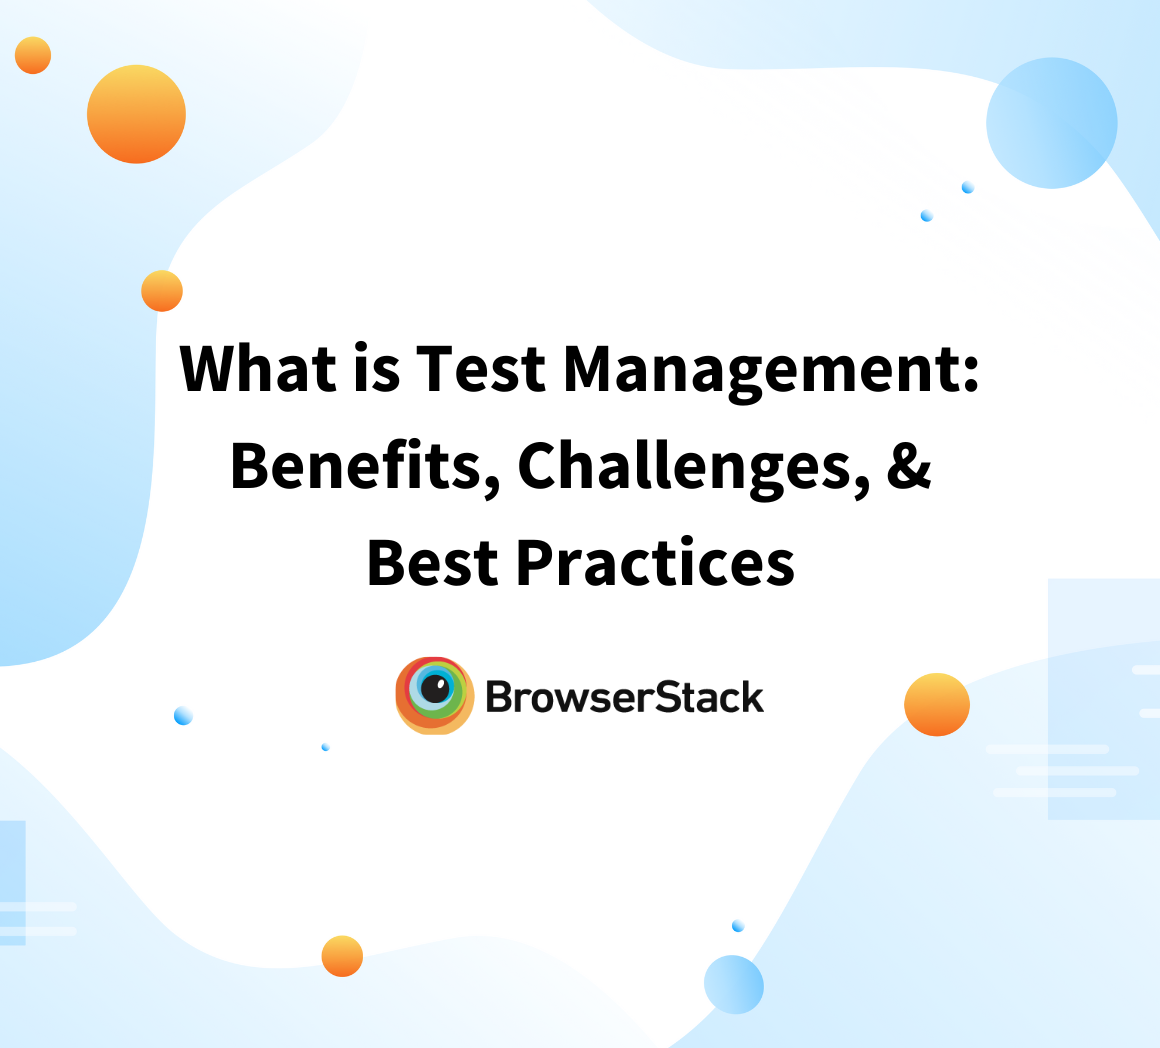 What is Test Management Benefits, Challenges, & Best Practices